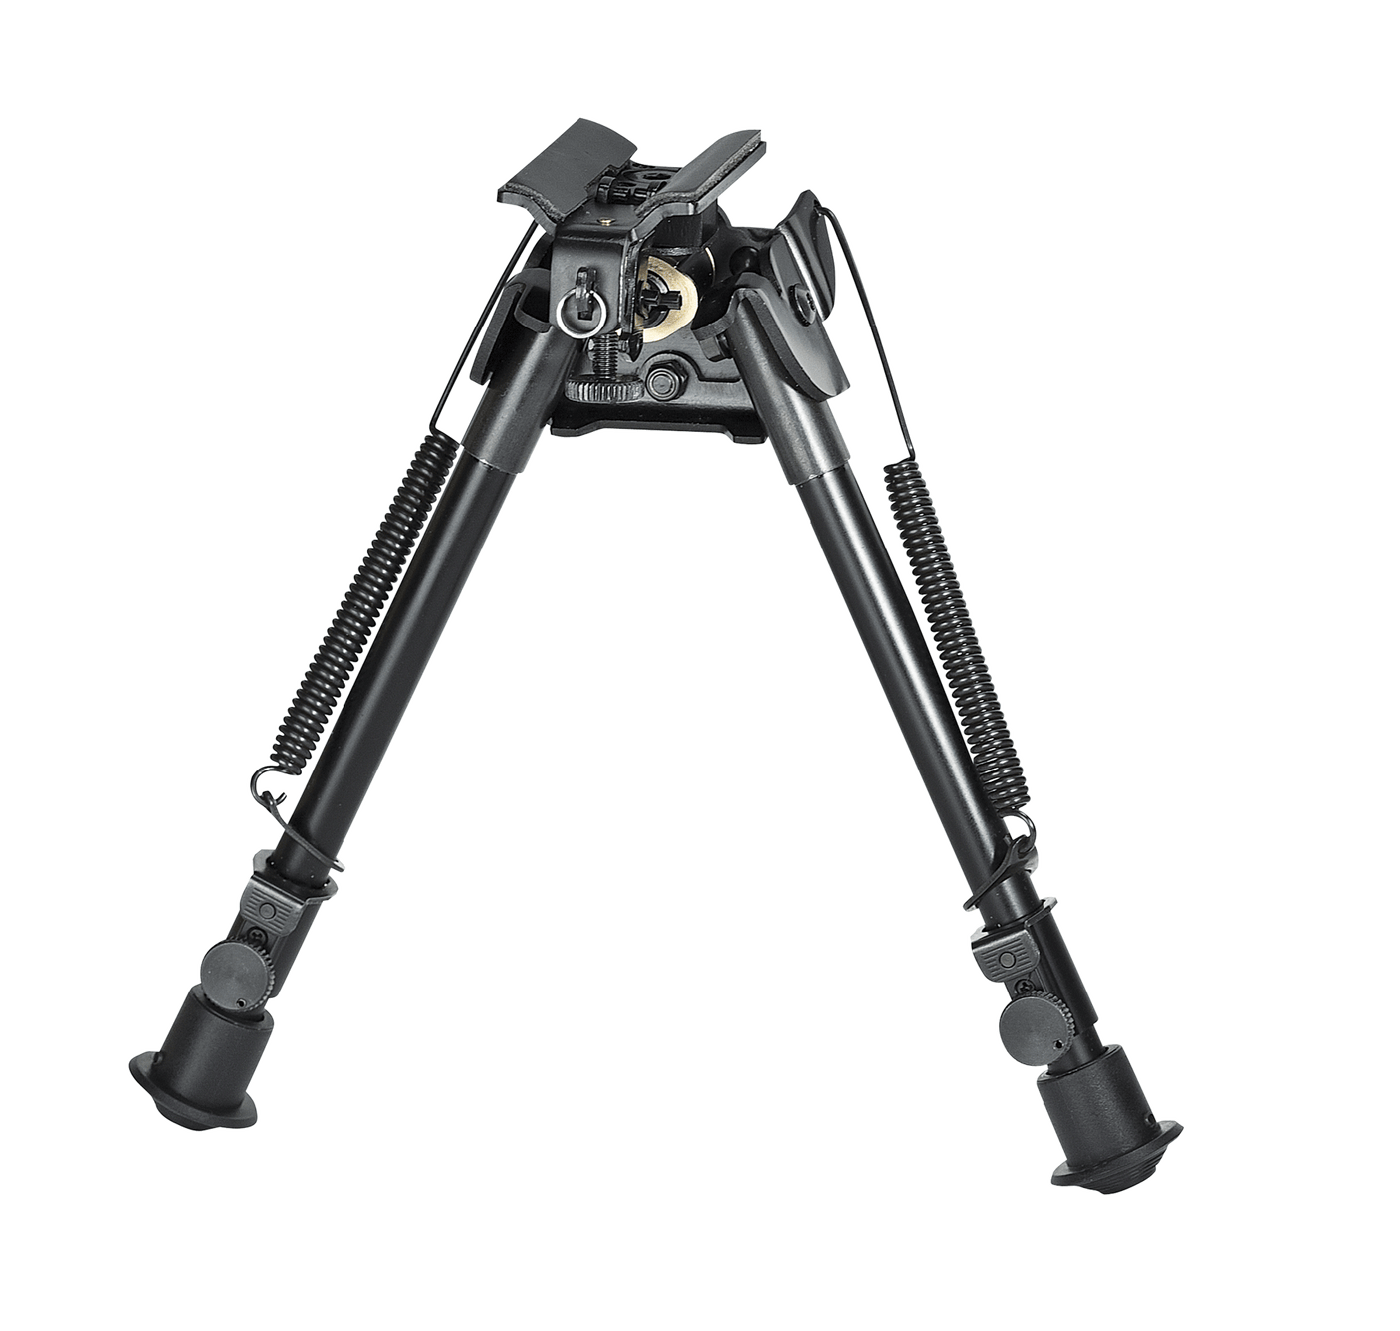 Champion Targets Champion Targets Pivot, Champ 40635 Bipod W/cant & Trav 6-9in Firearm Accessories